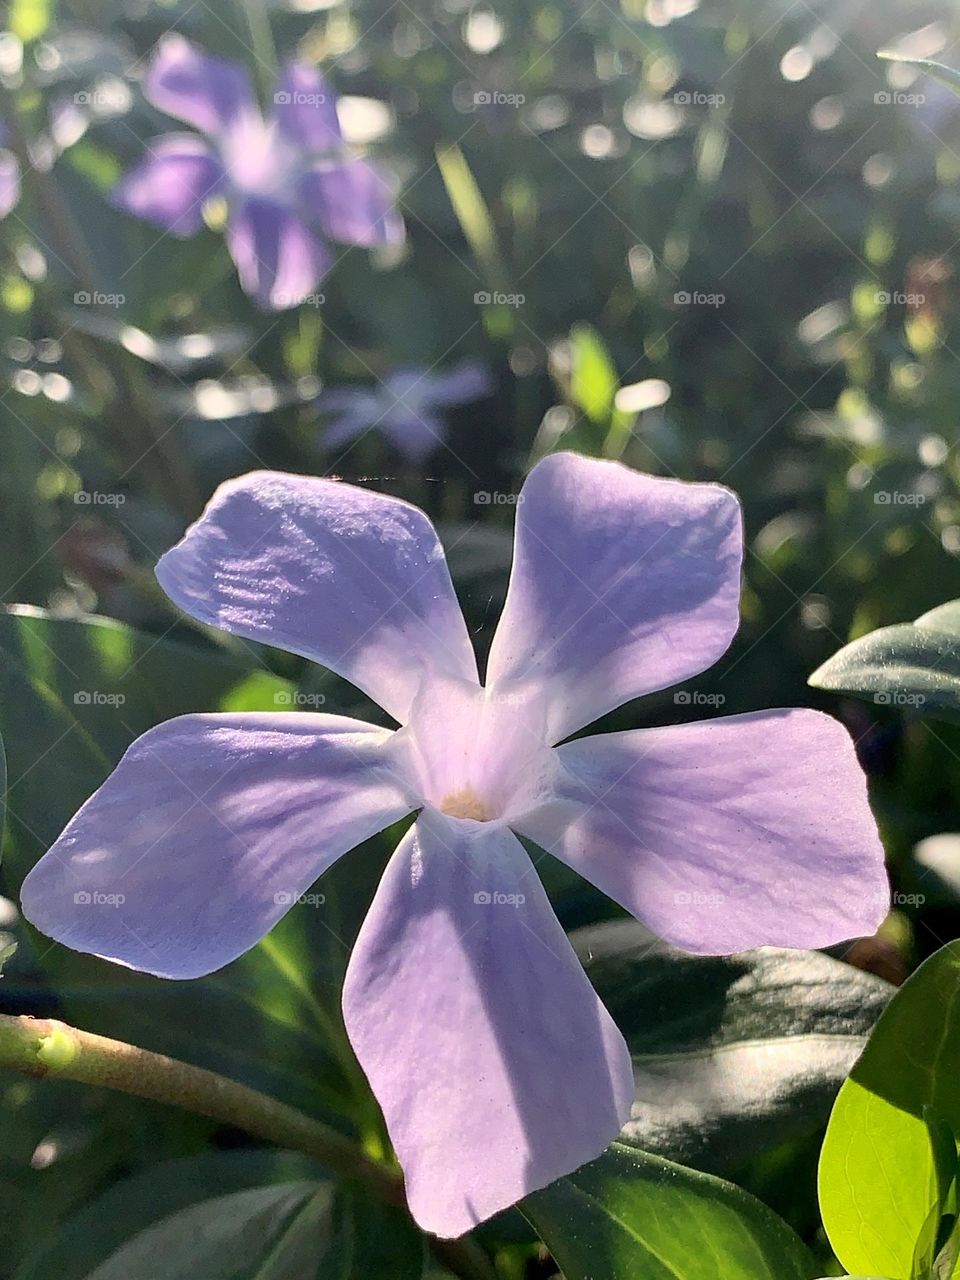 Pale purple periwinkle flowers in the late afternoon sun